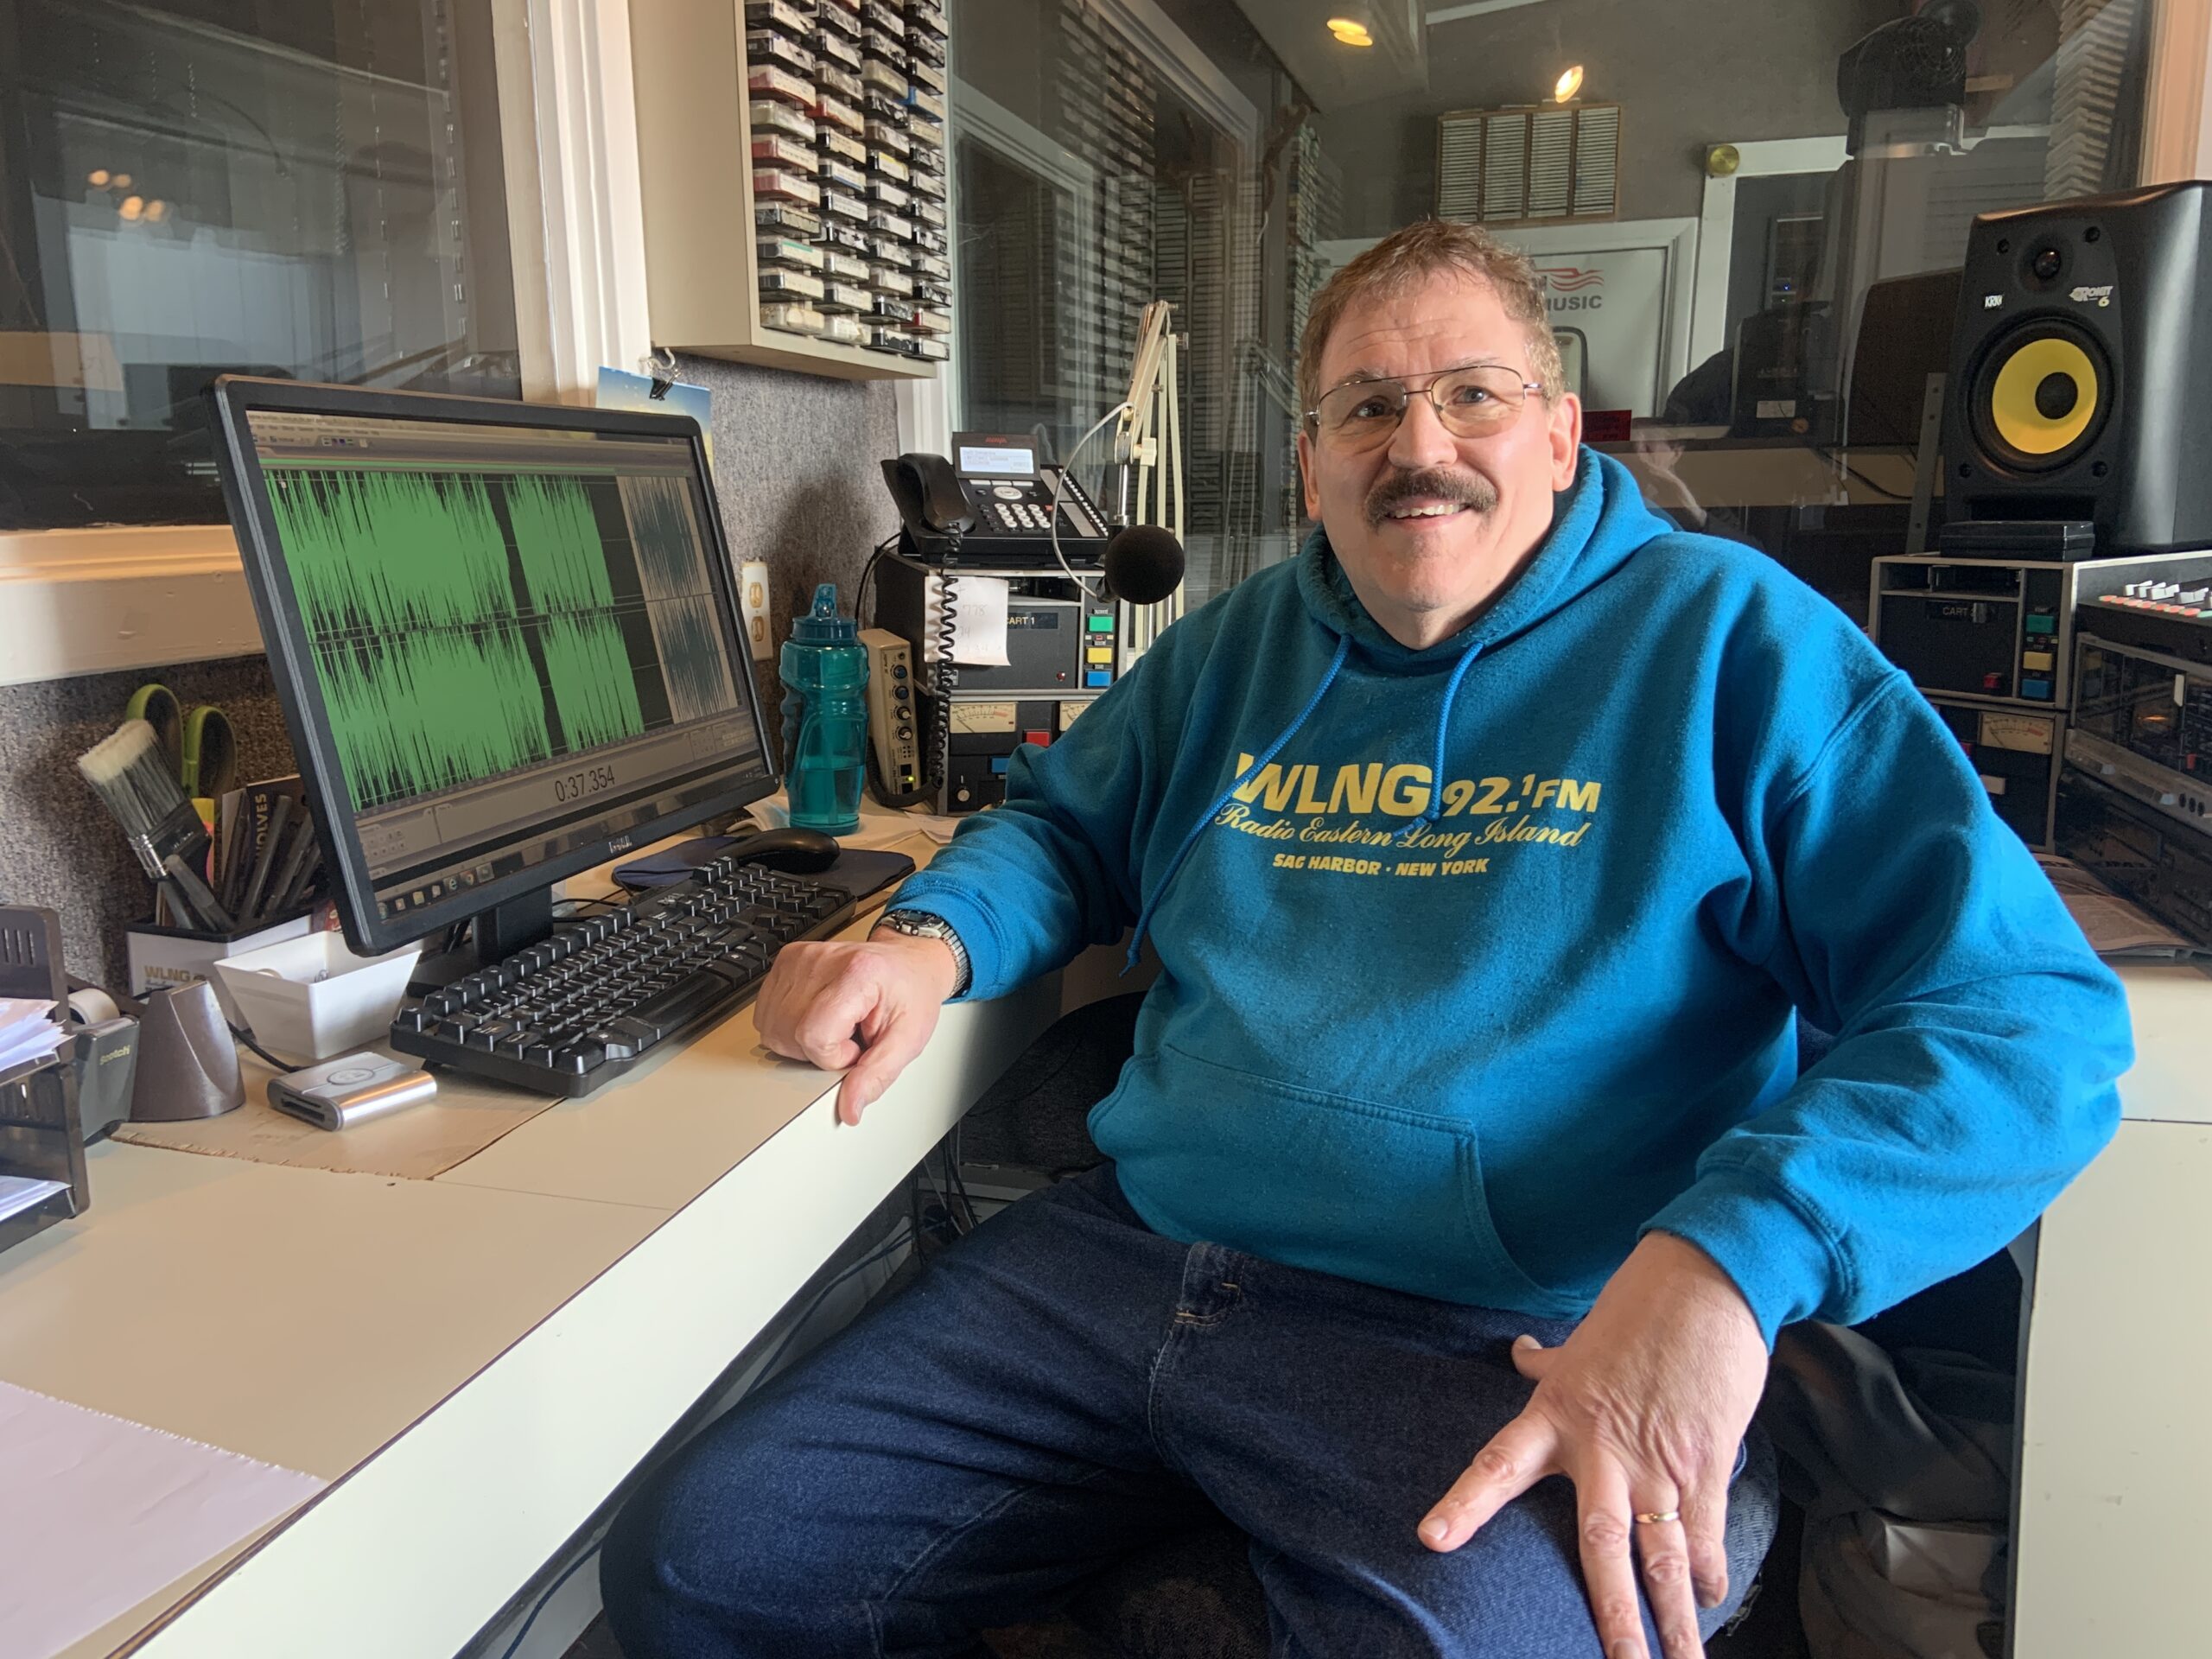 Dan Duprey, a longtime fixture at WLNG Radio in Sag  Harbor, best known for his daily news reports, has retired. STEPHEN J. KOTZ